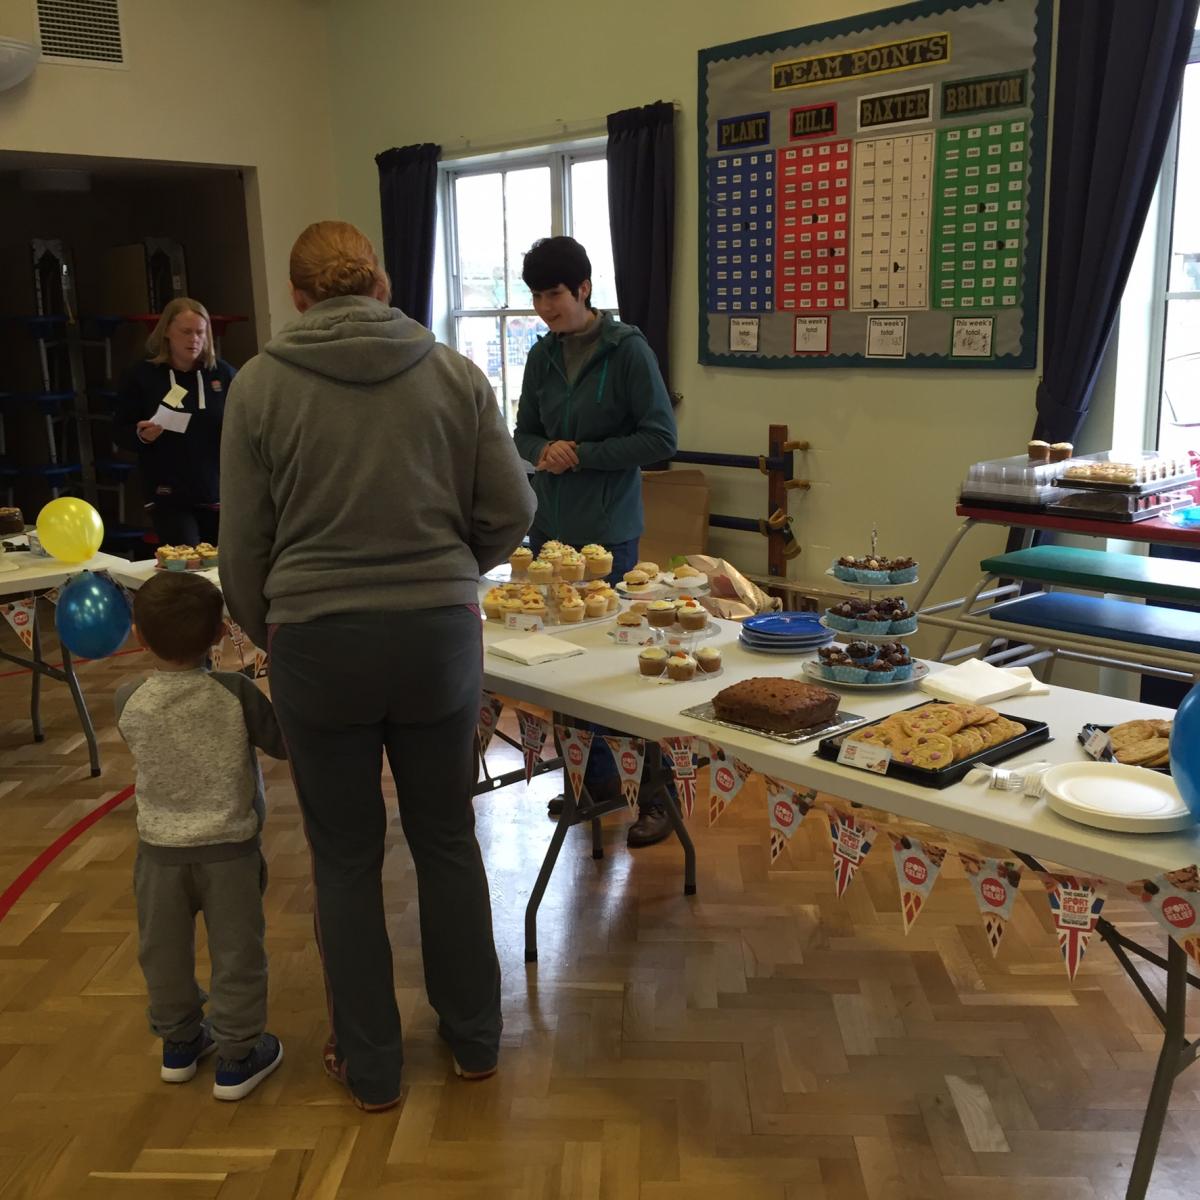 More than £100 was raised for Sport Relief by St Oswald's CE Primary School, through a coffee morning and bake sale